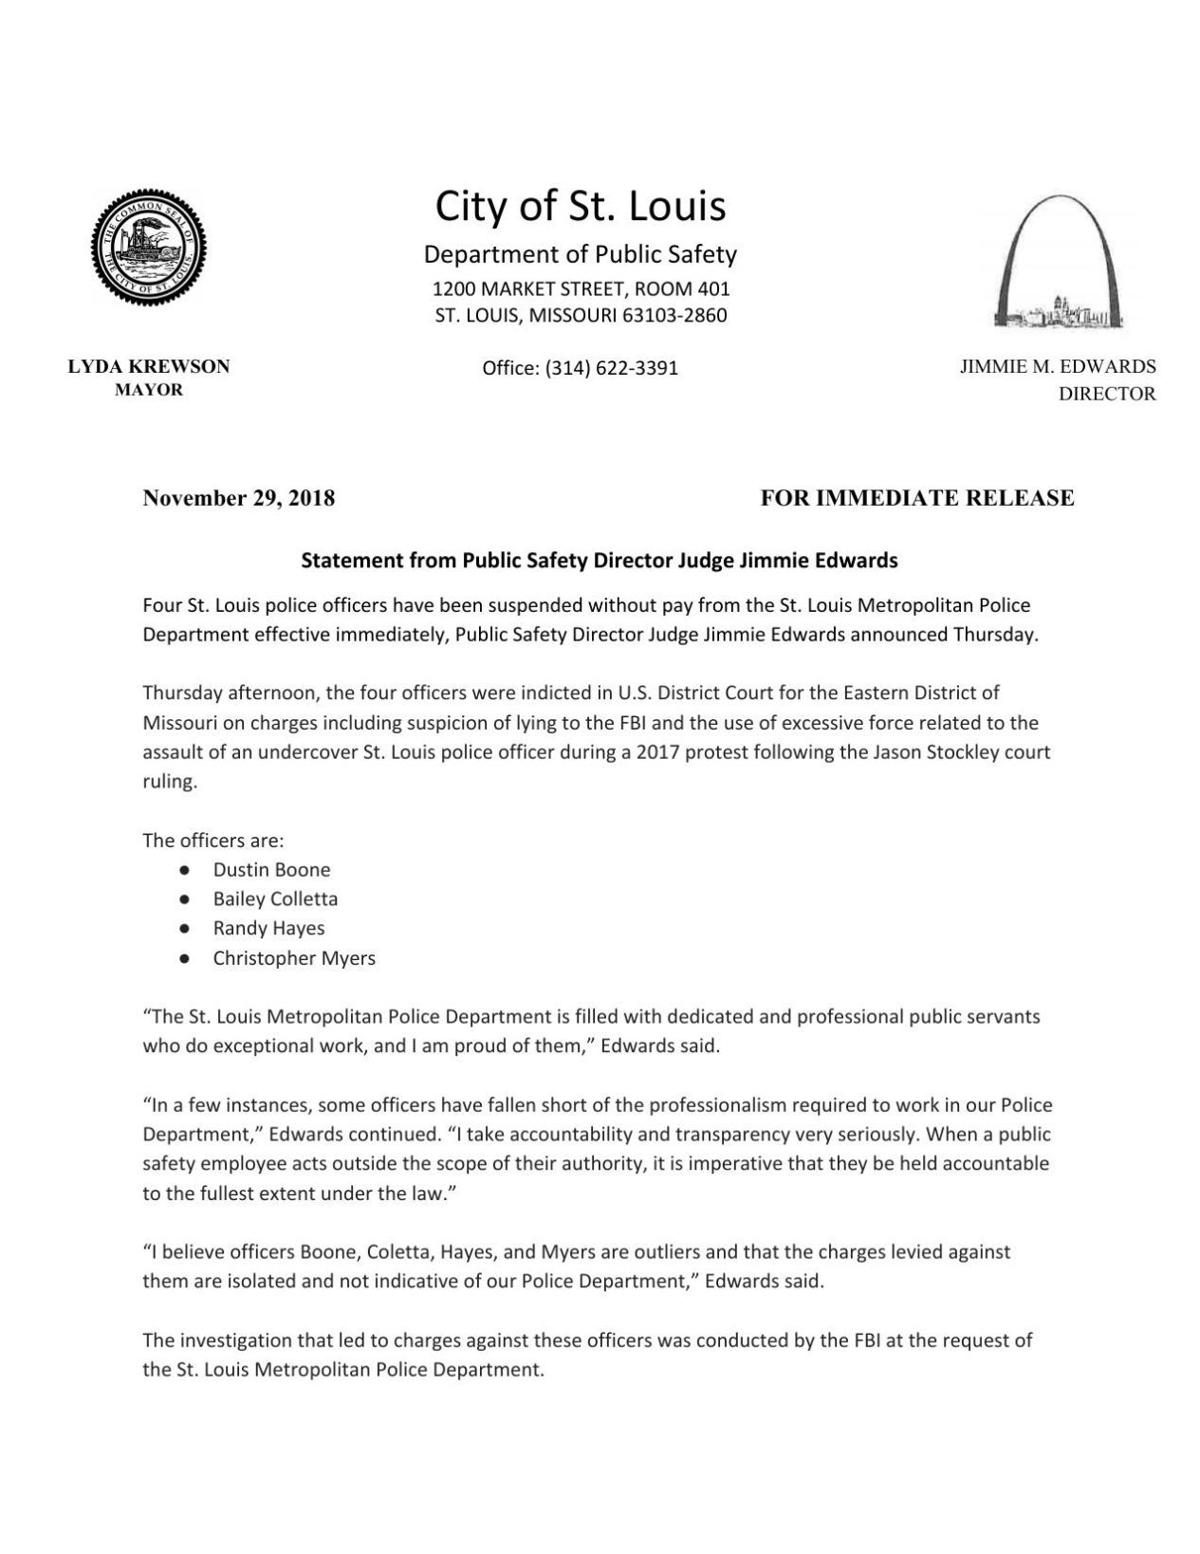 St. Louis public safety director's statement about indicted officers